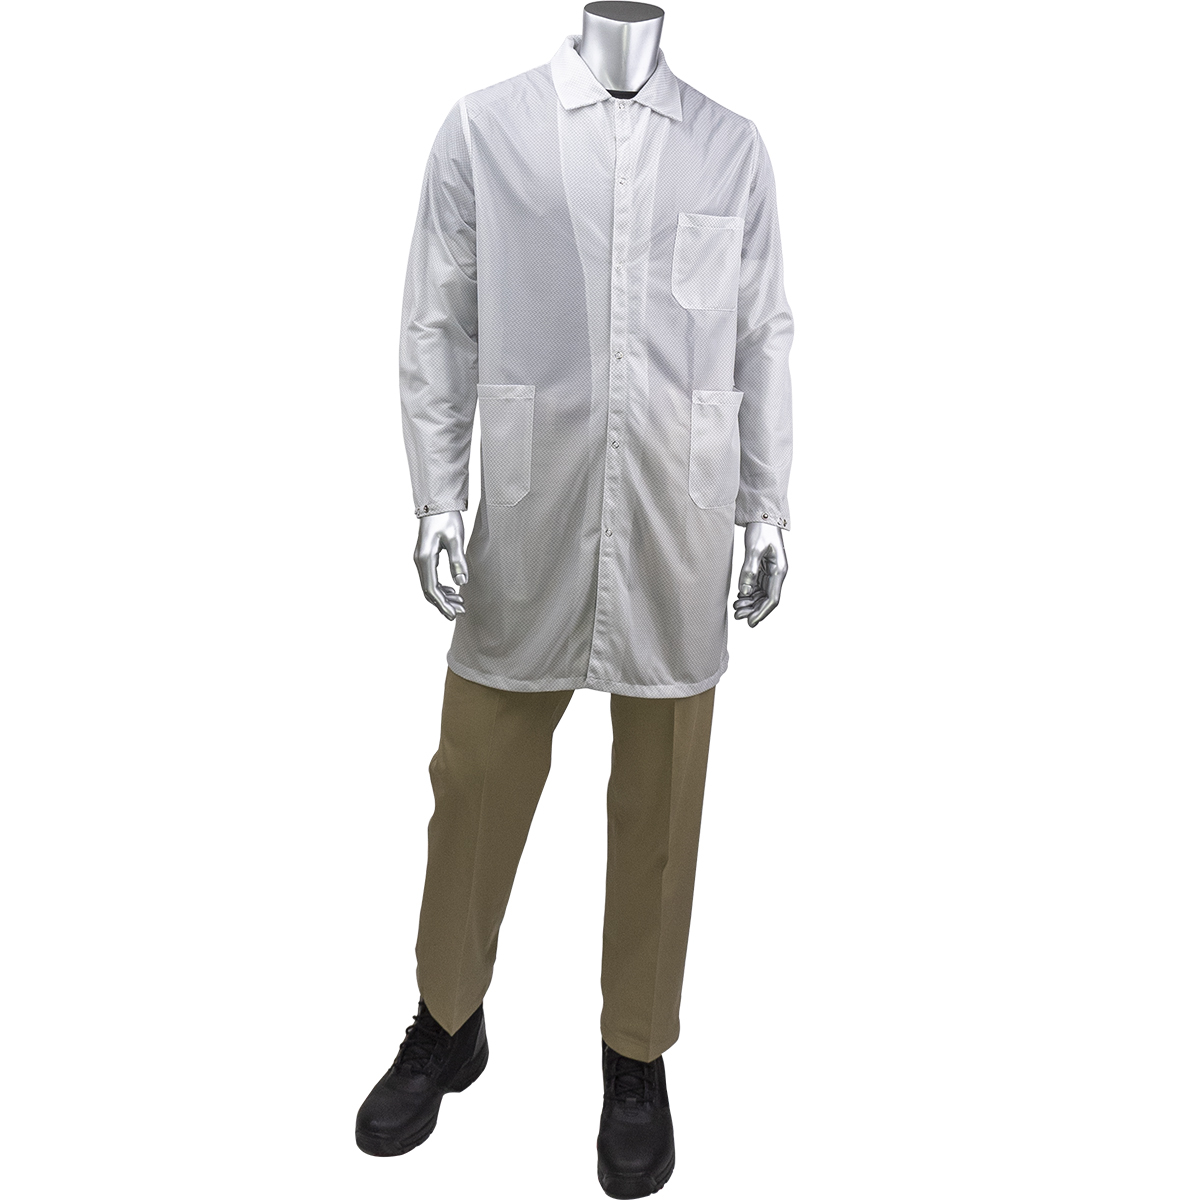 BR51C-44WH PIP® Uniform Technology™ StatStar Long ESD Labcoats with ESD Knit Cuffs, White